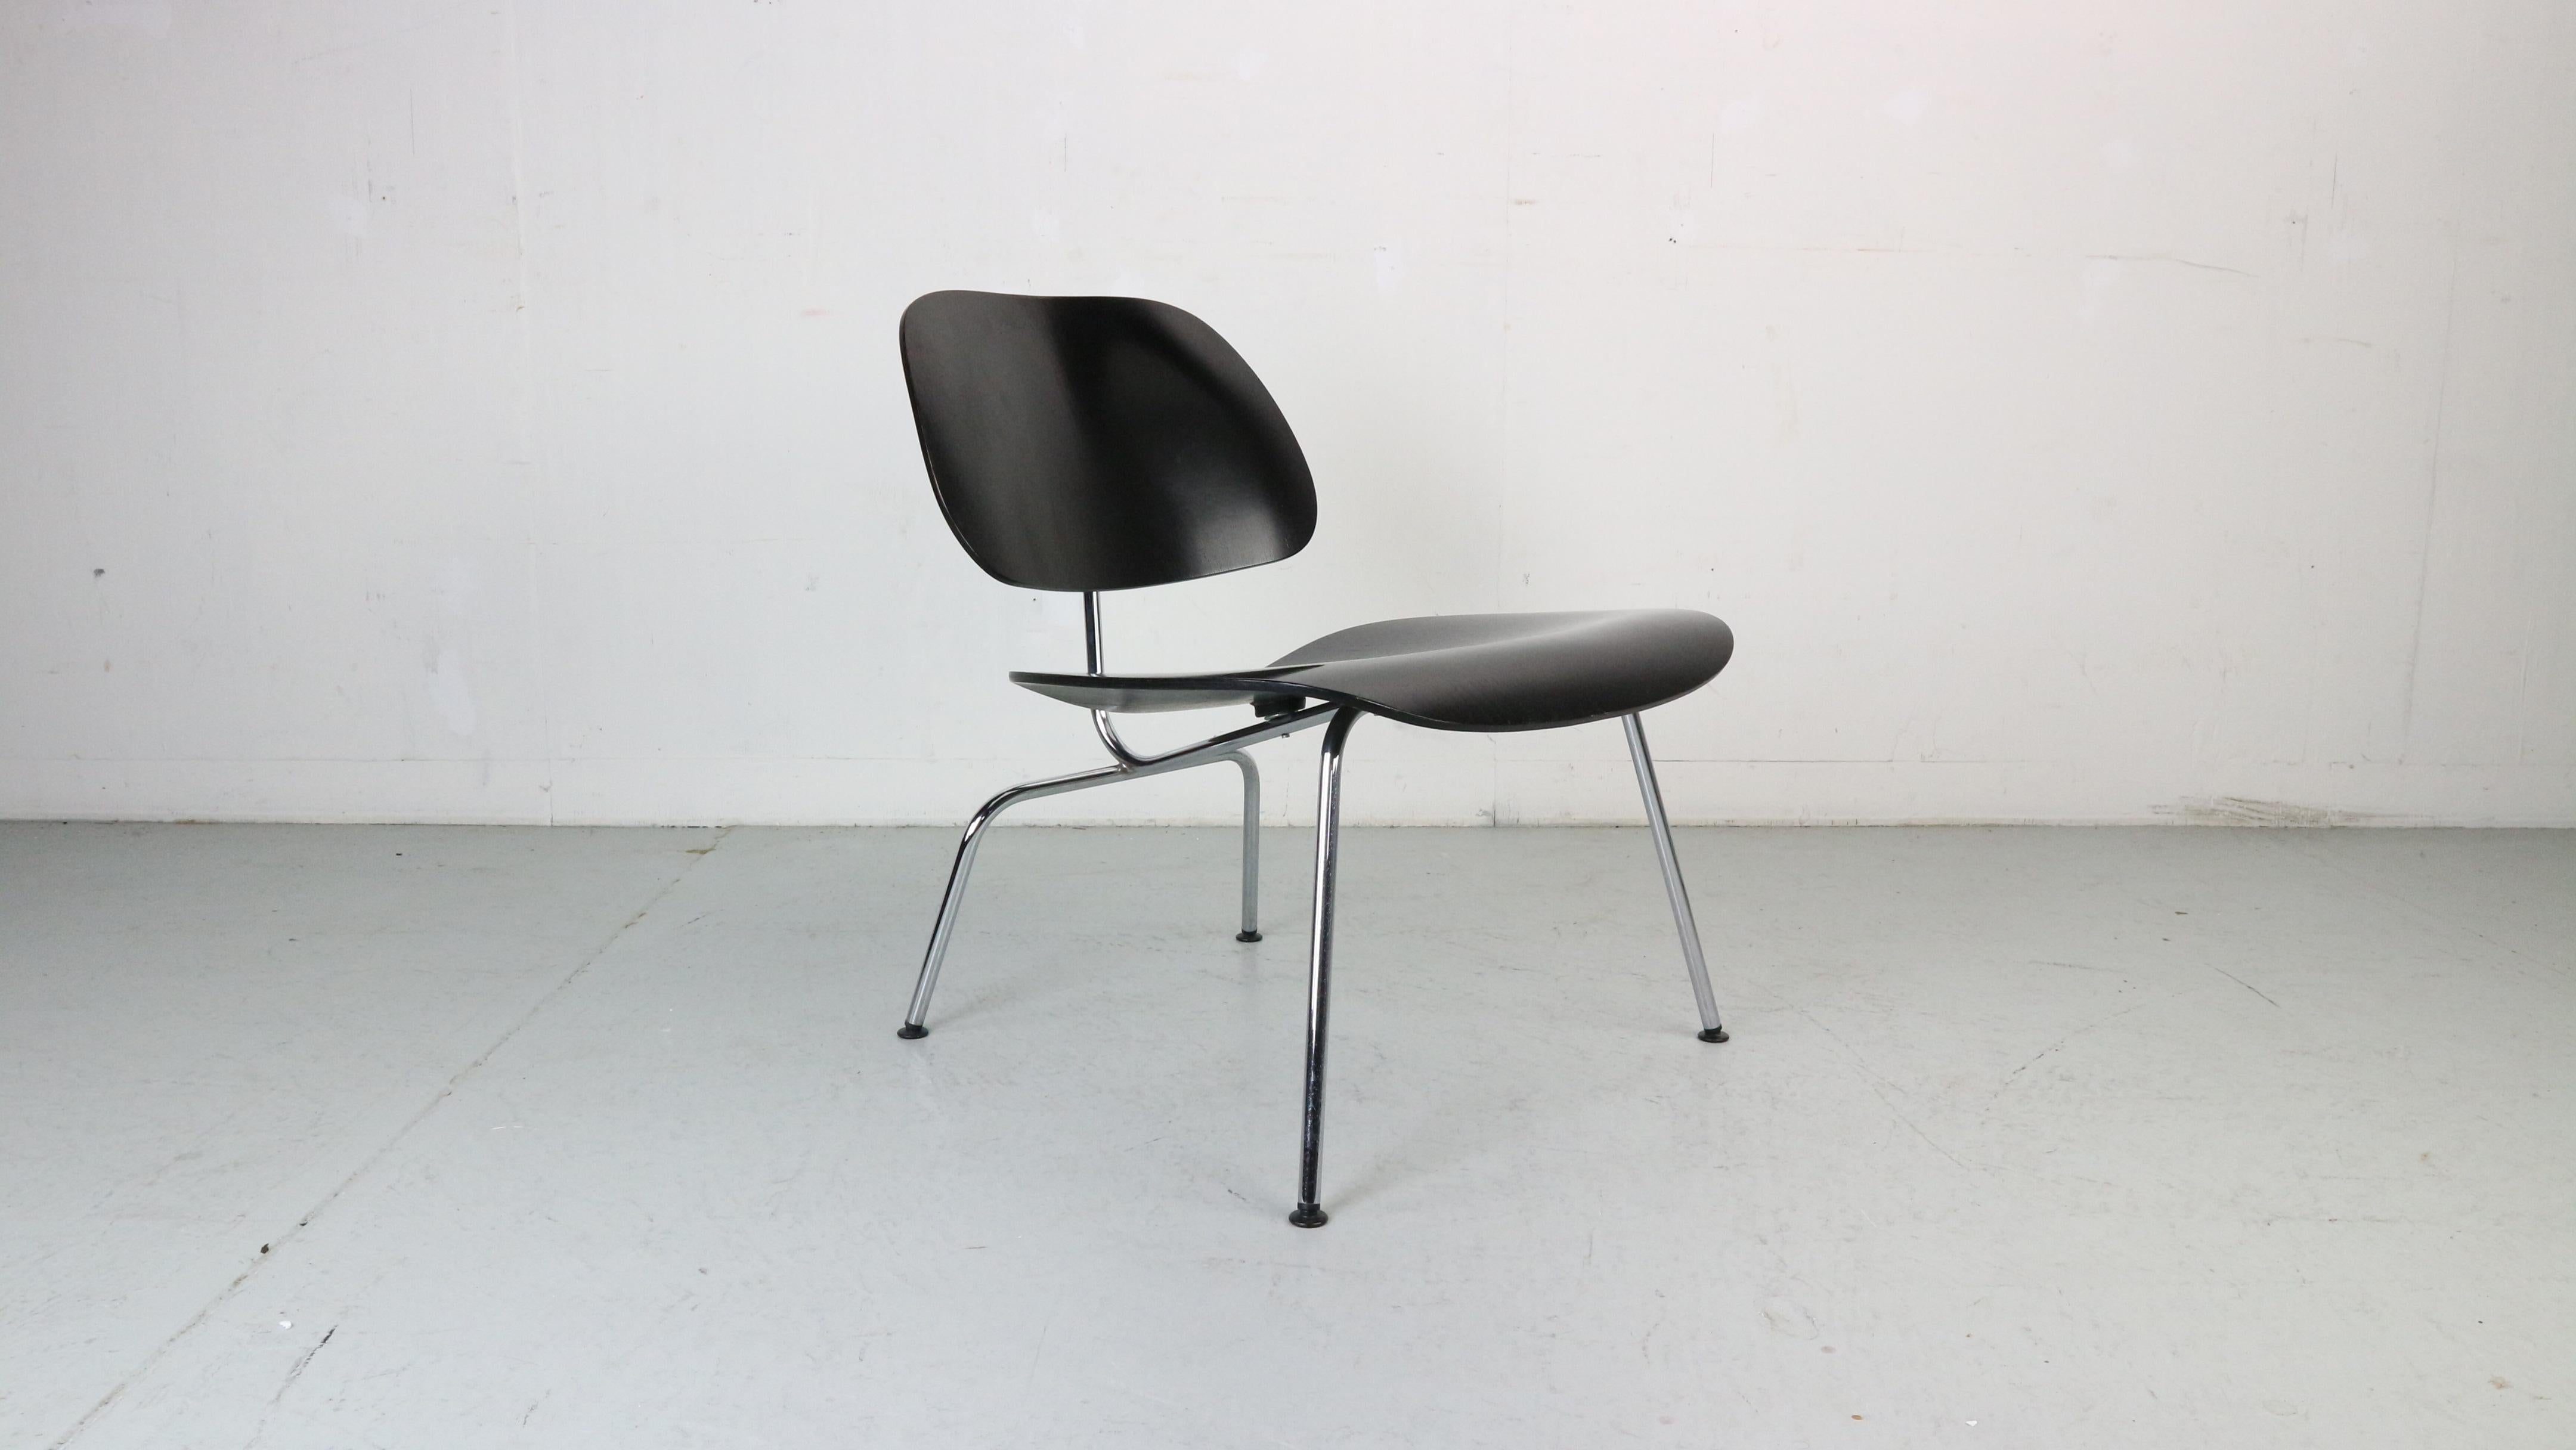 Lounge chair designed by Charles and Ray Eames for Vitra, 1999.

The Vitra LCM Chair, designed by Charles and Ray Eames, is the result of years of experimentation in which the designers were looking for new processes to adapt three-dimensionally